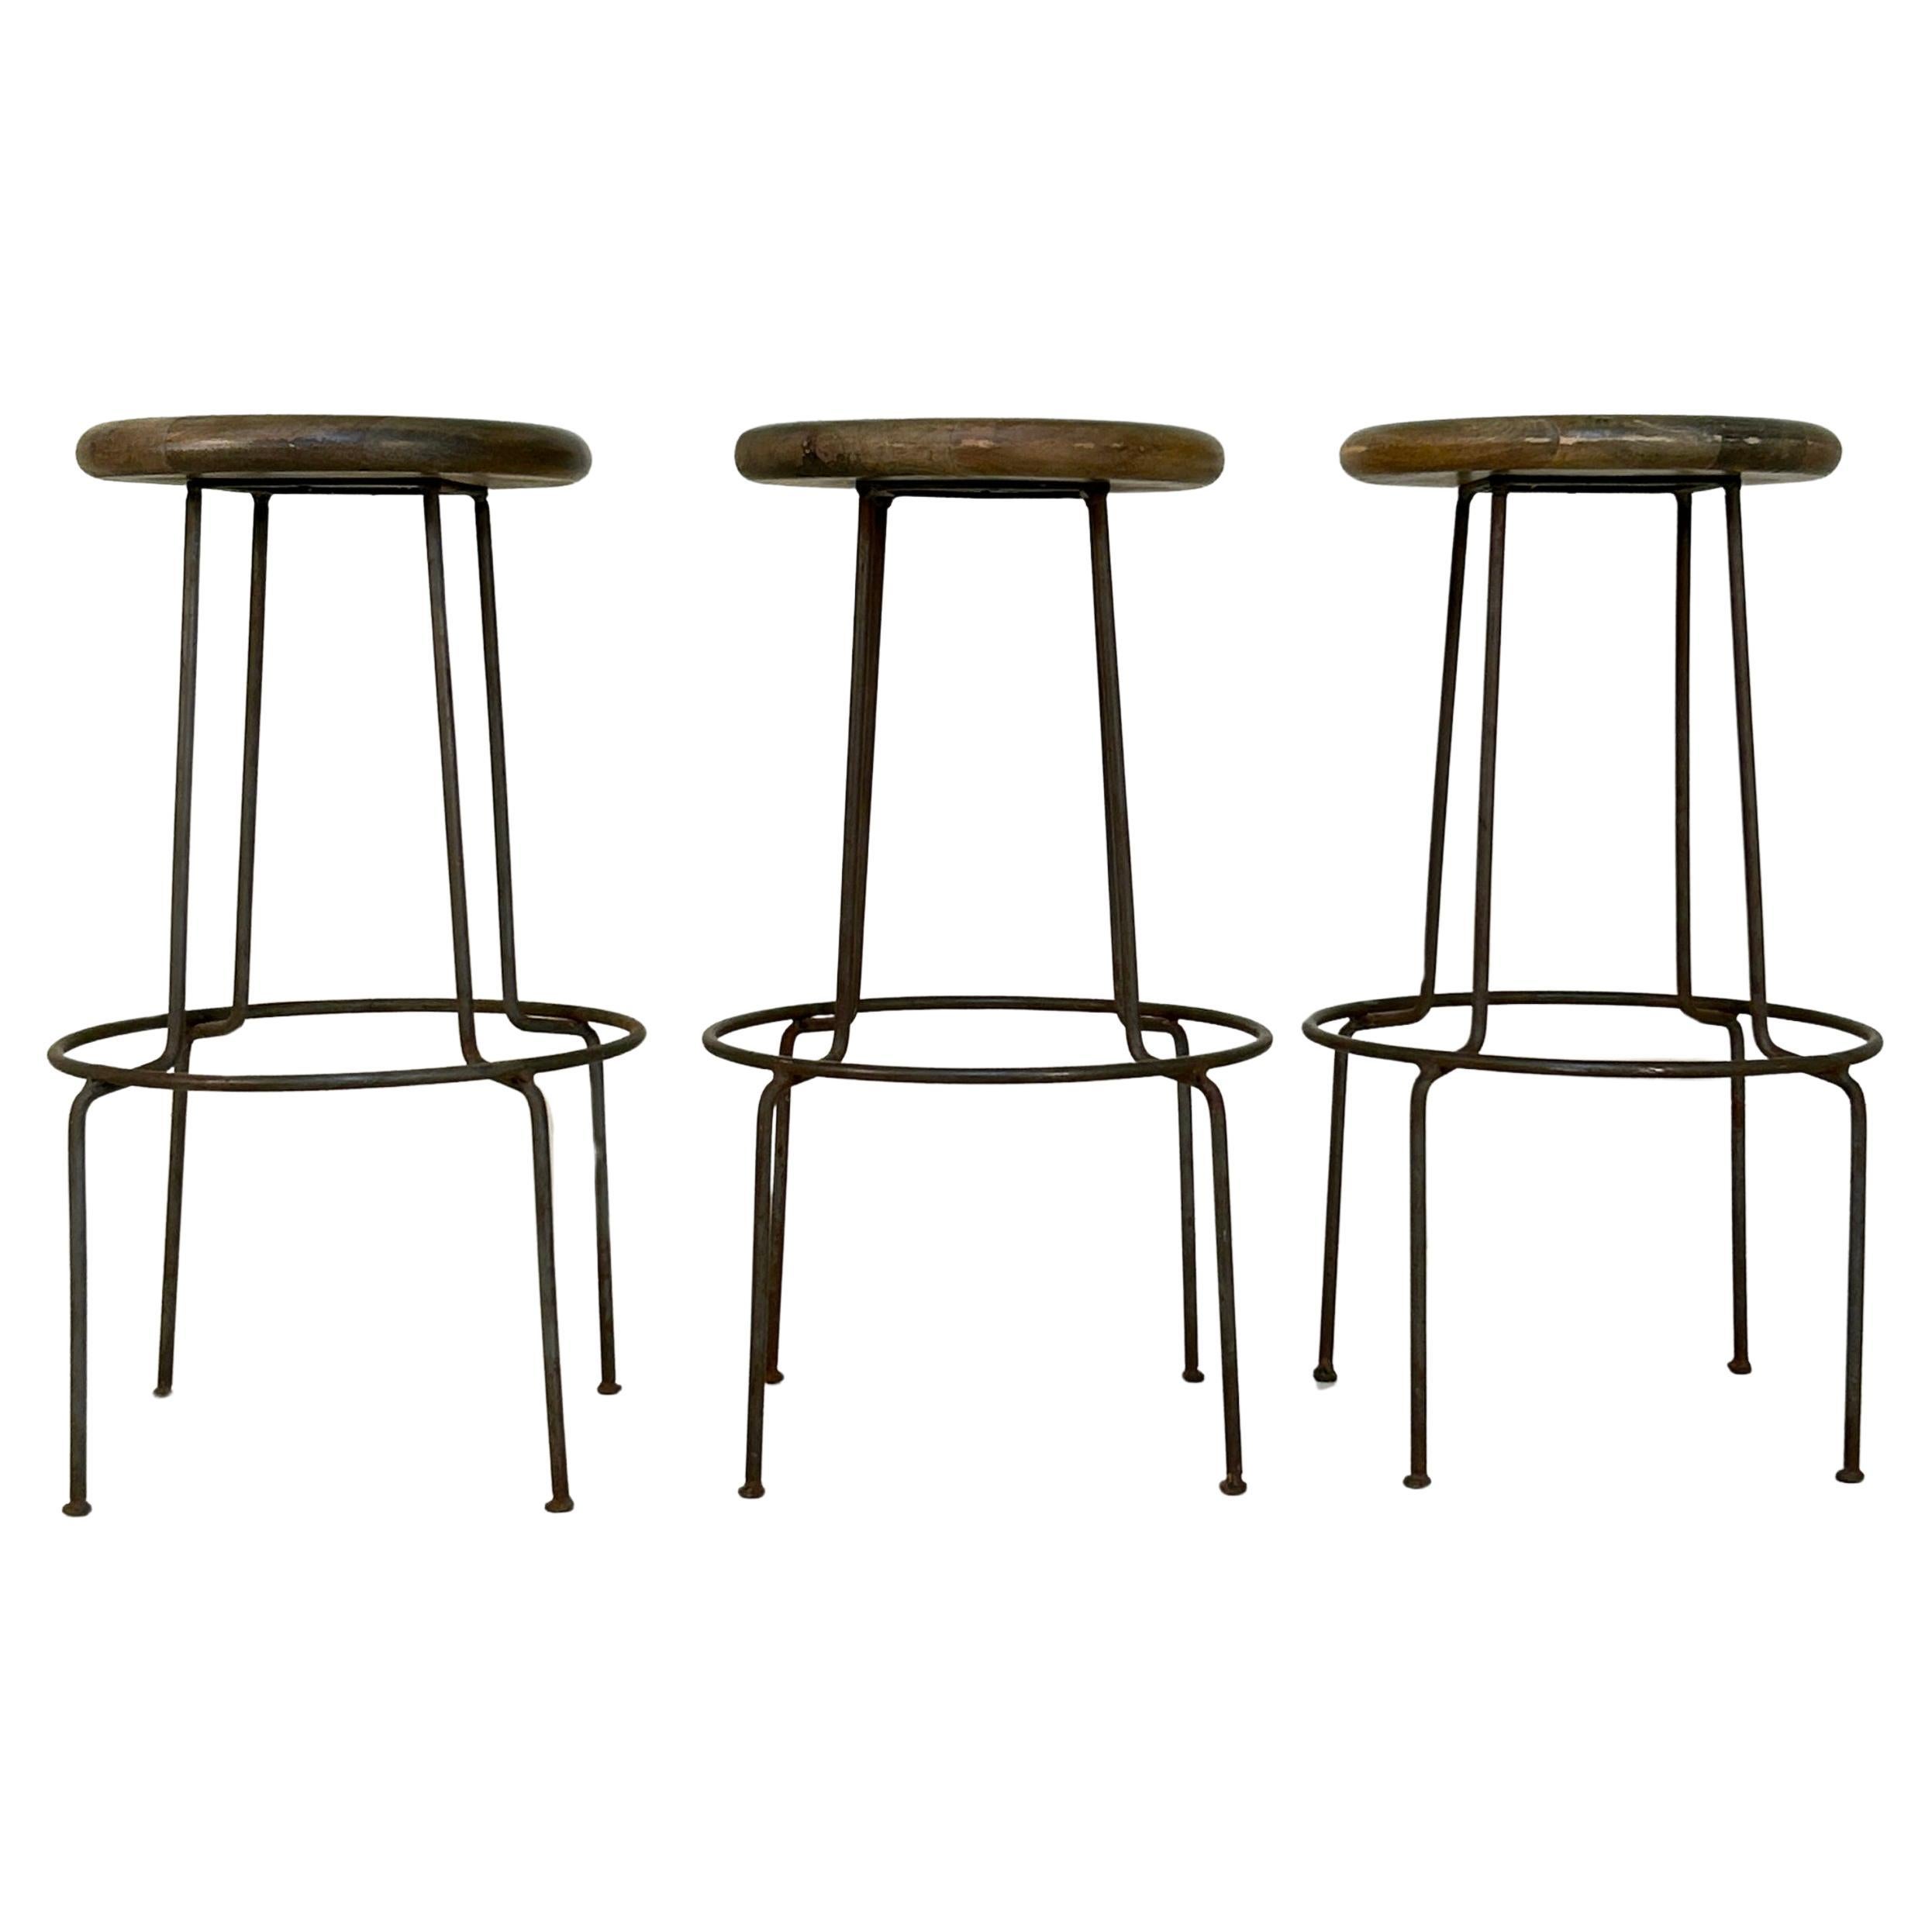 Trio of 3 cerused distressed oak and iron bar stools